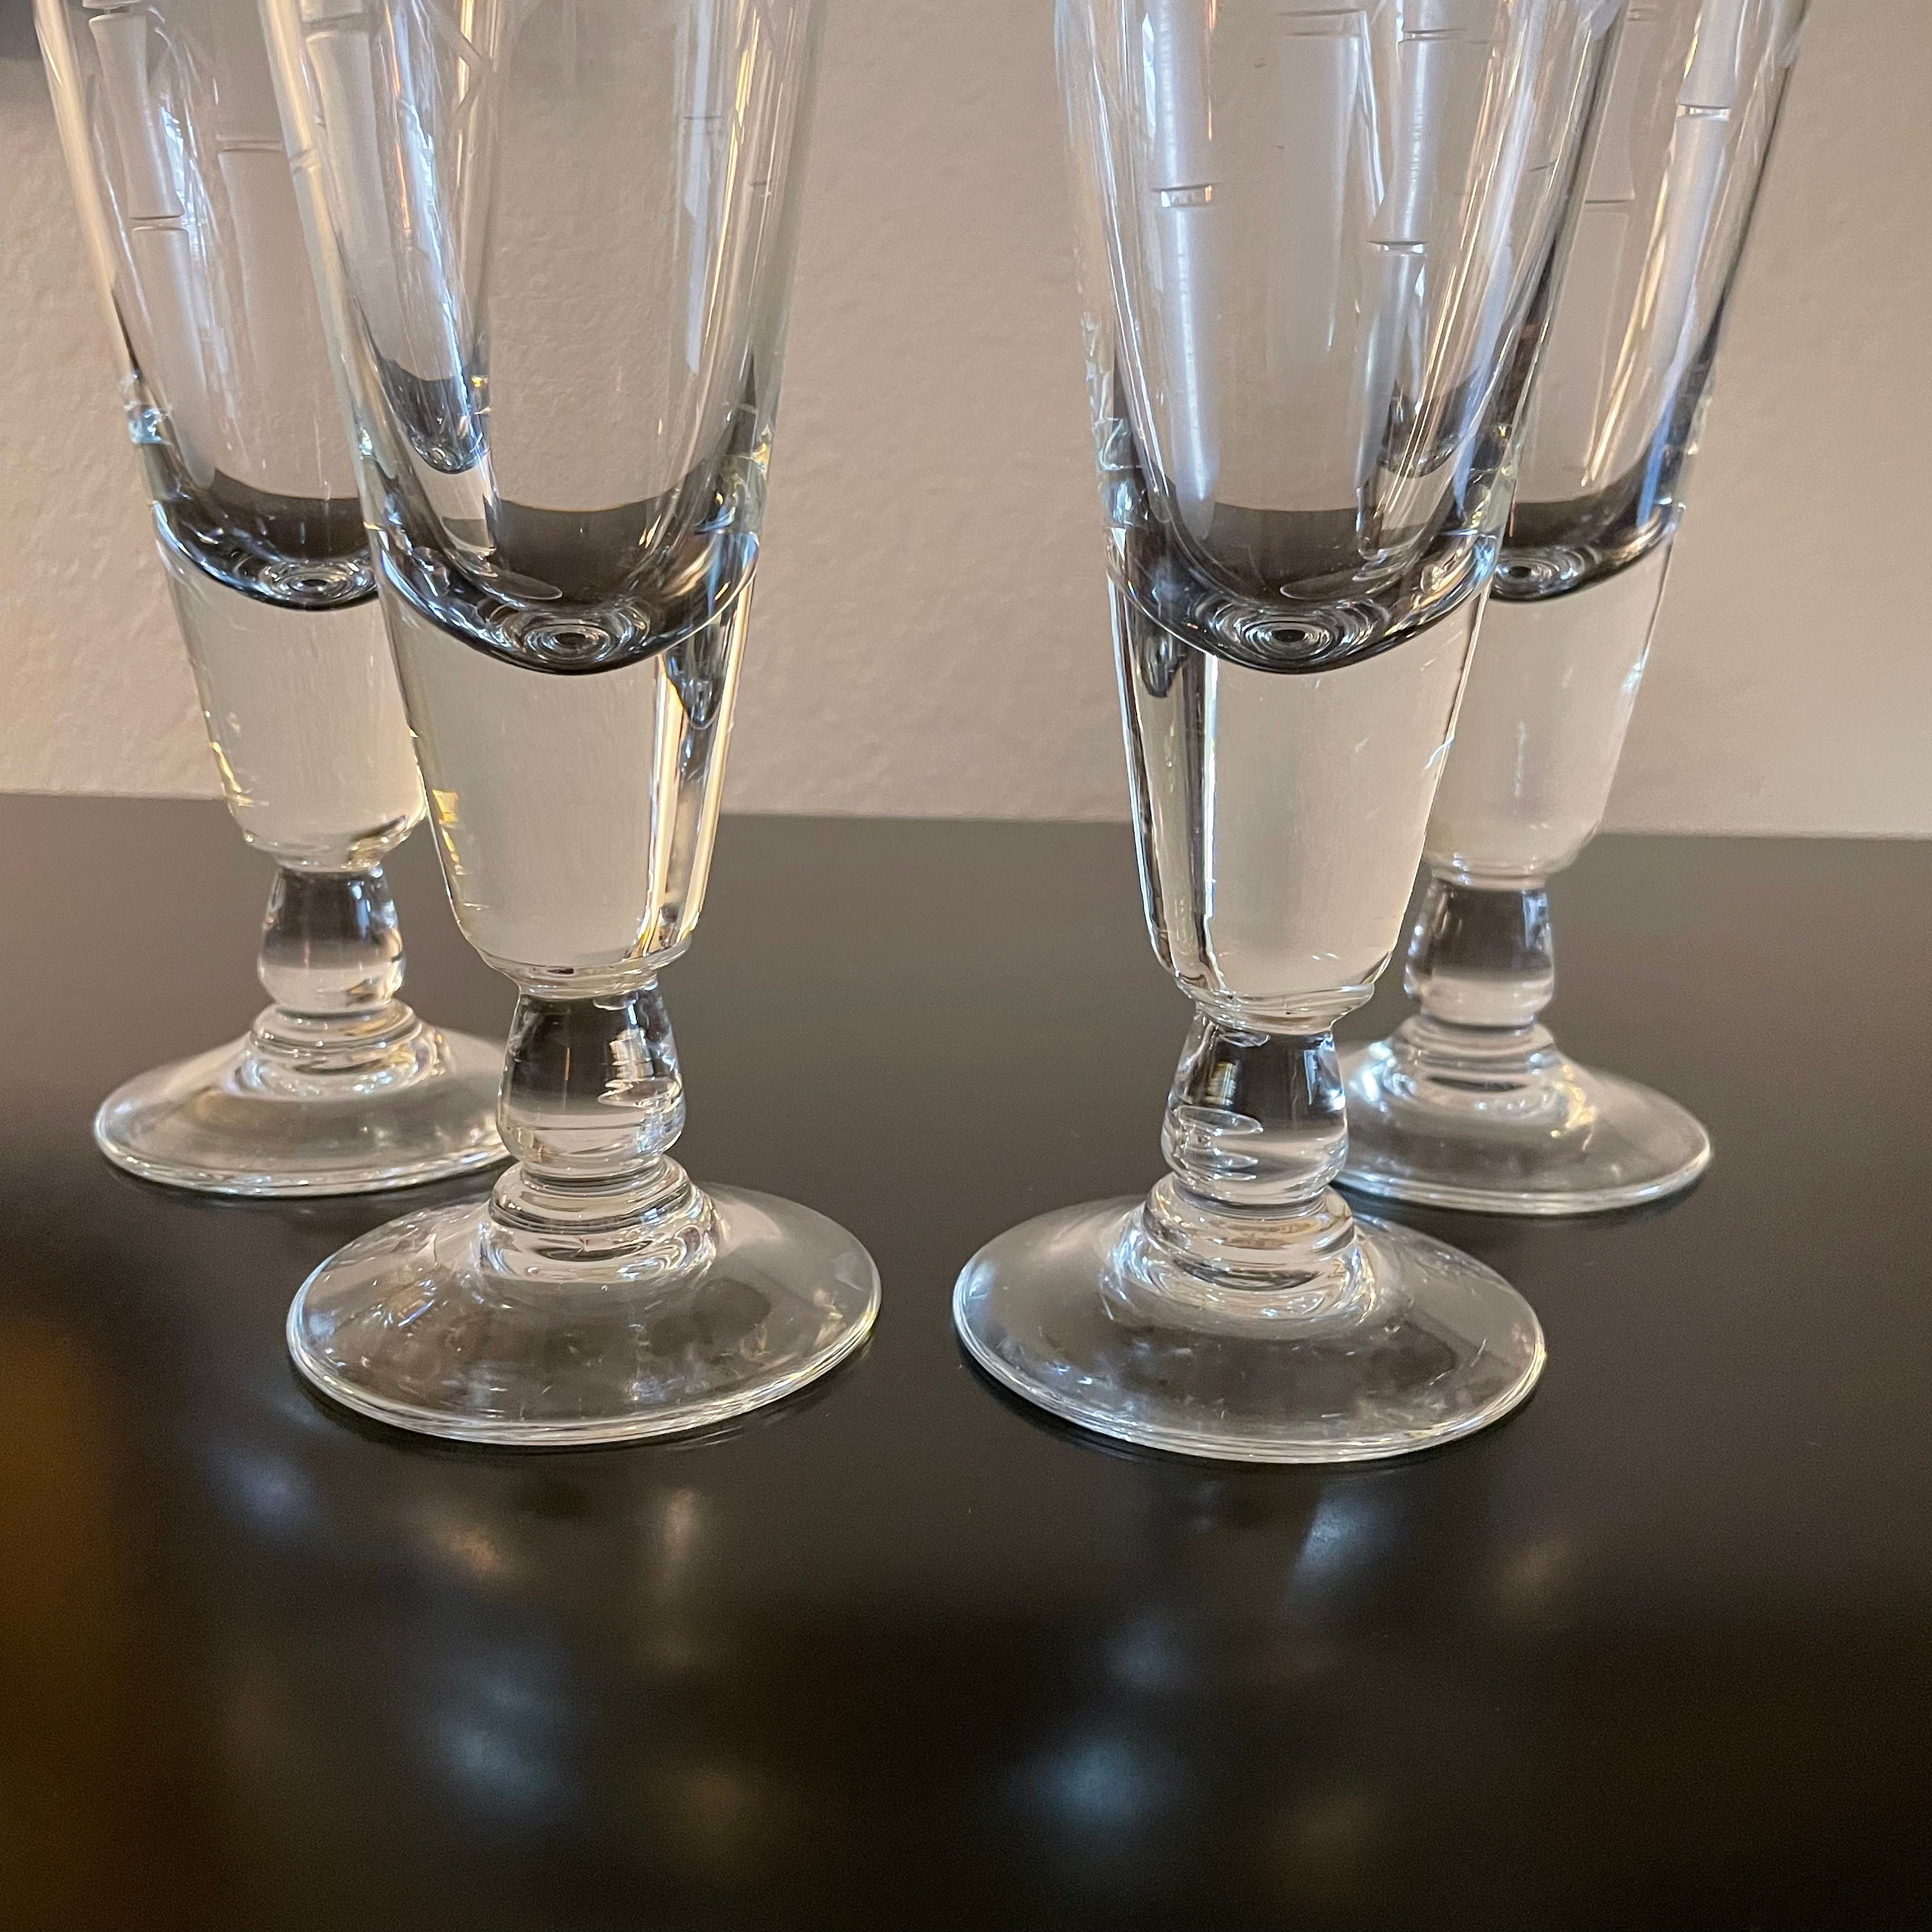 Hand Painted Bamboo Wine Glasses, Set of 4